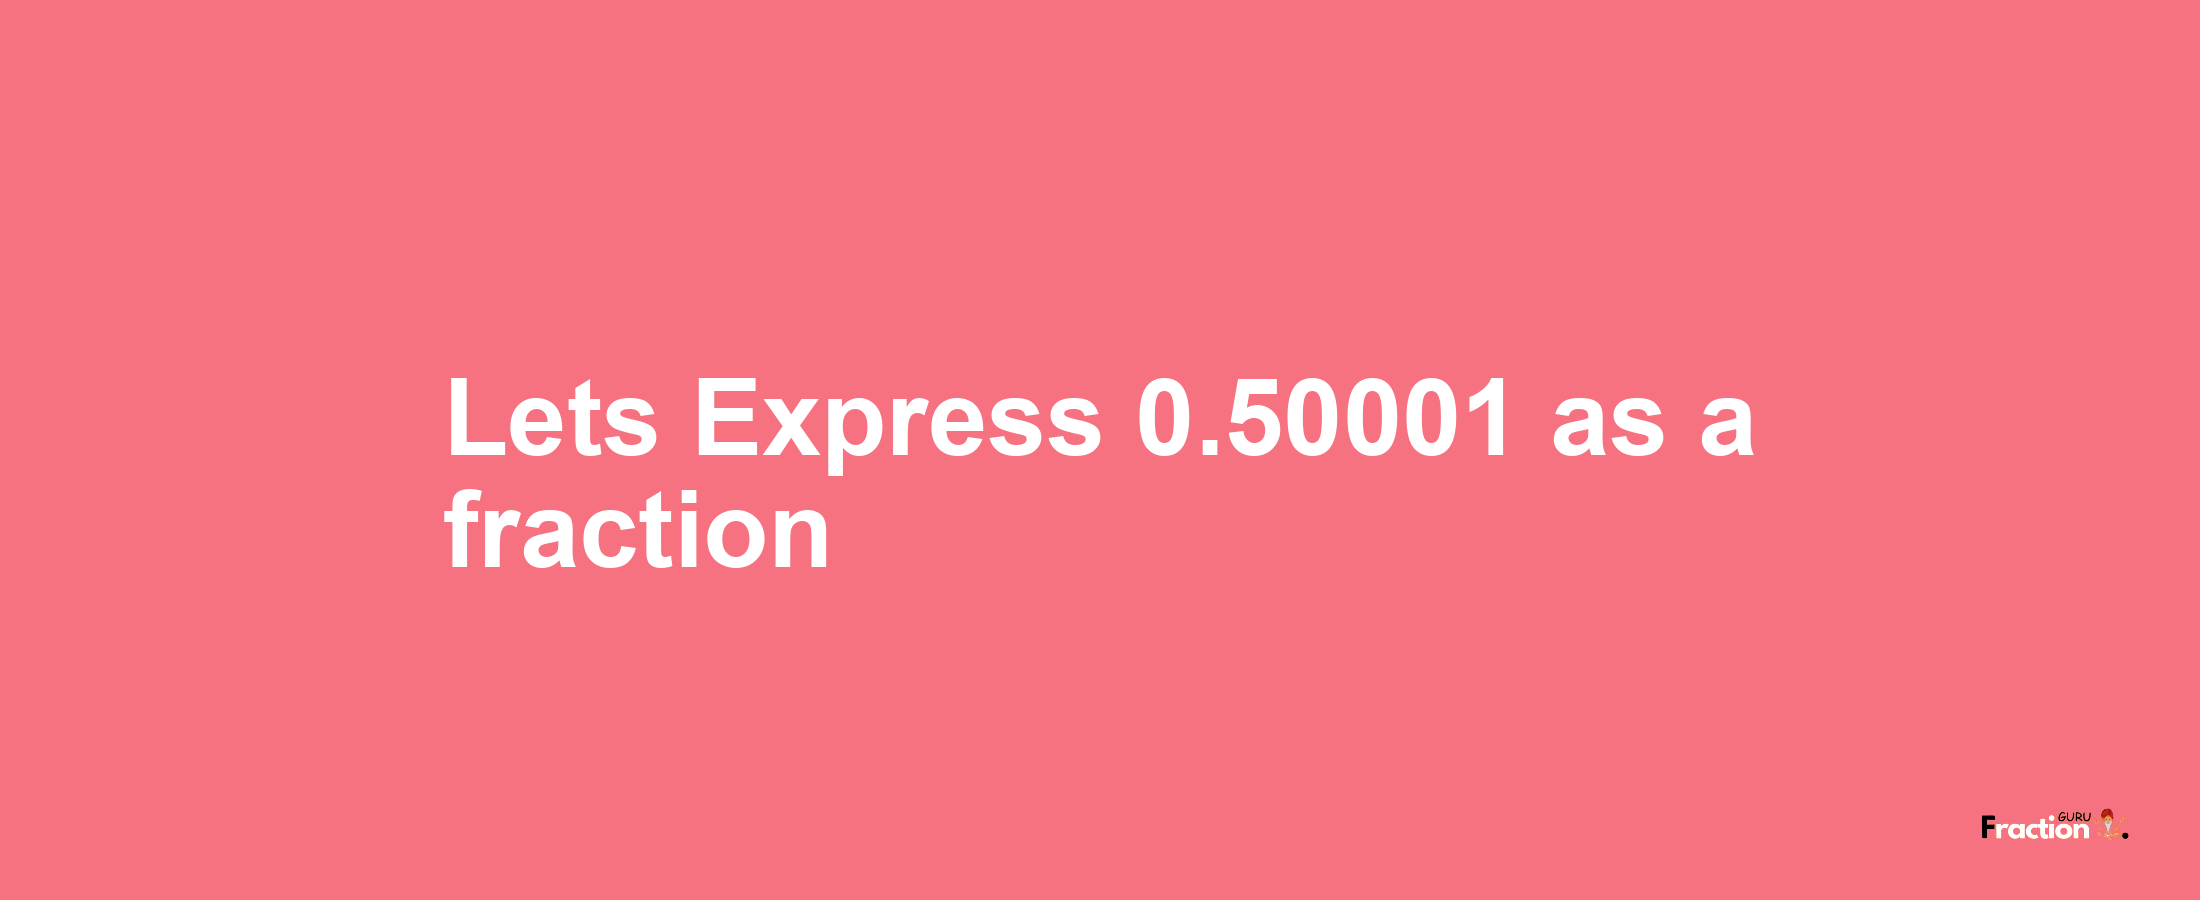 Lets Express 0.50001 as afraction